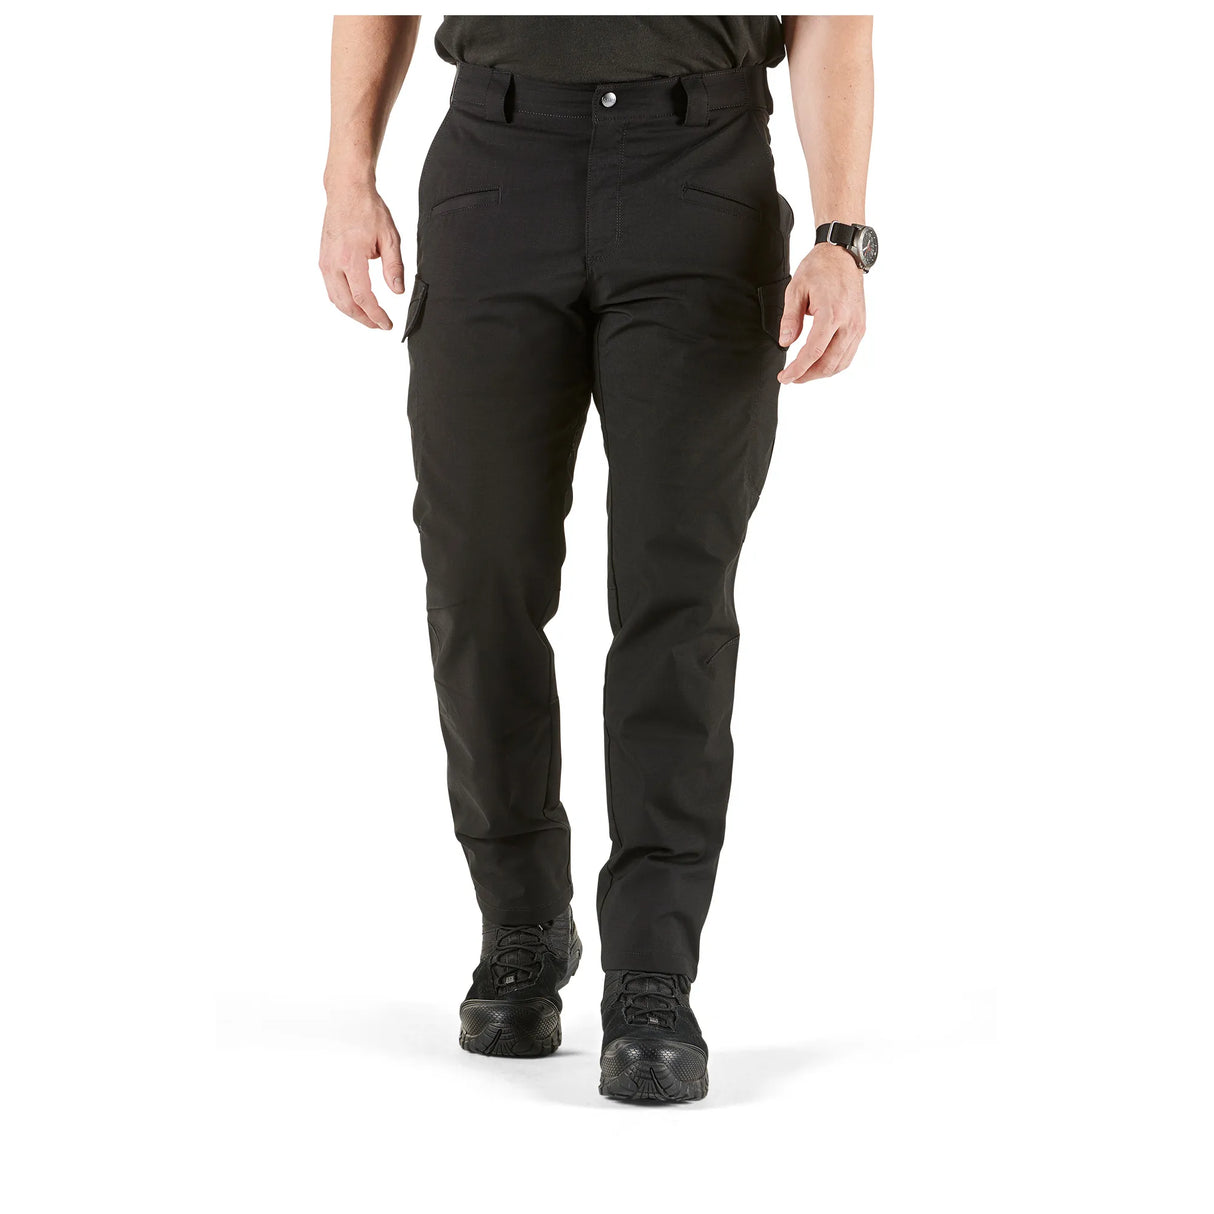 Reliable Performance Wear: Trust in the durability and functionality of the Icon Pant.